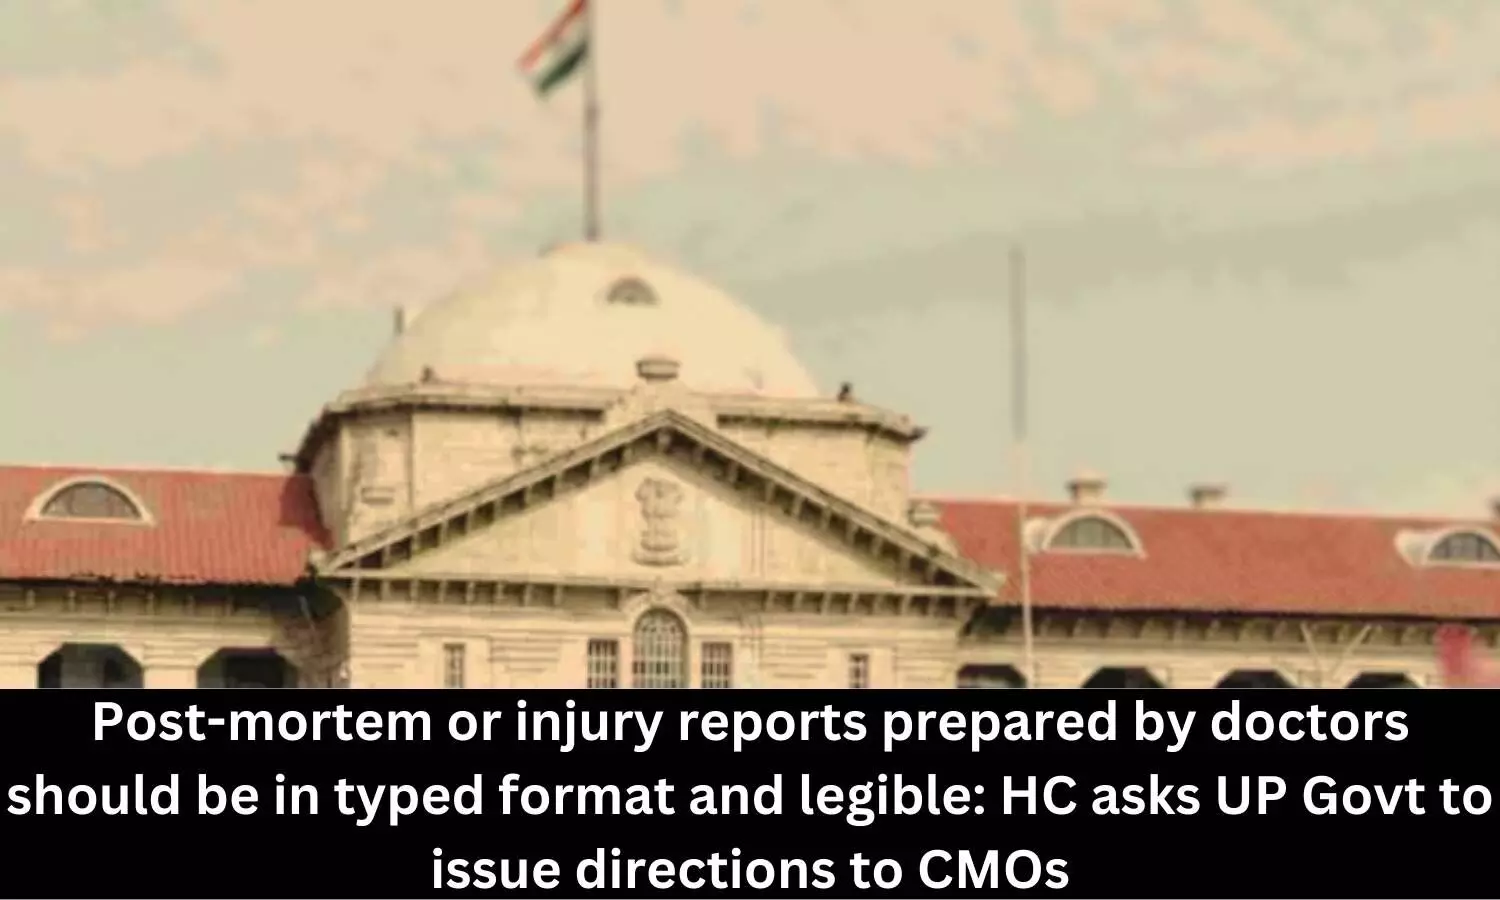 Doctors should prepare post-mortem or injury reports in typed format, legible: HC asks UP Govt to issue directions to CMOs